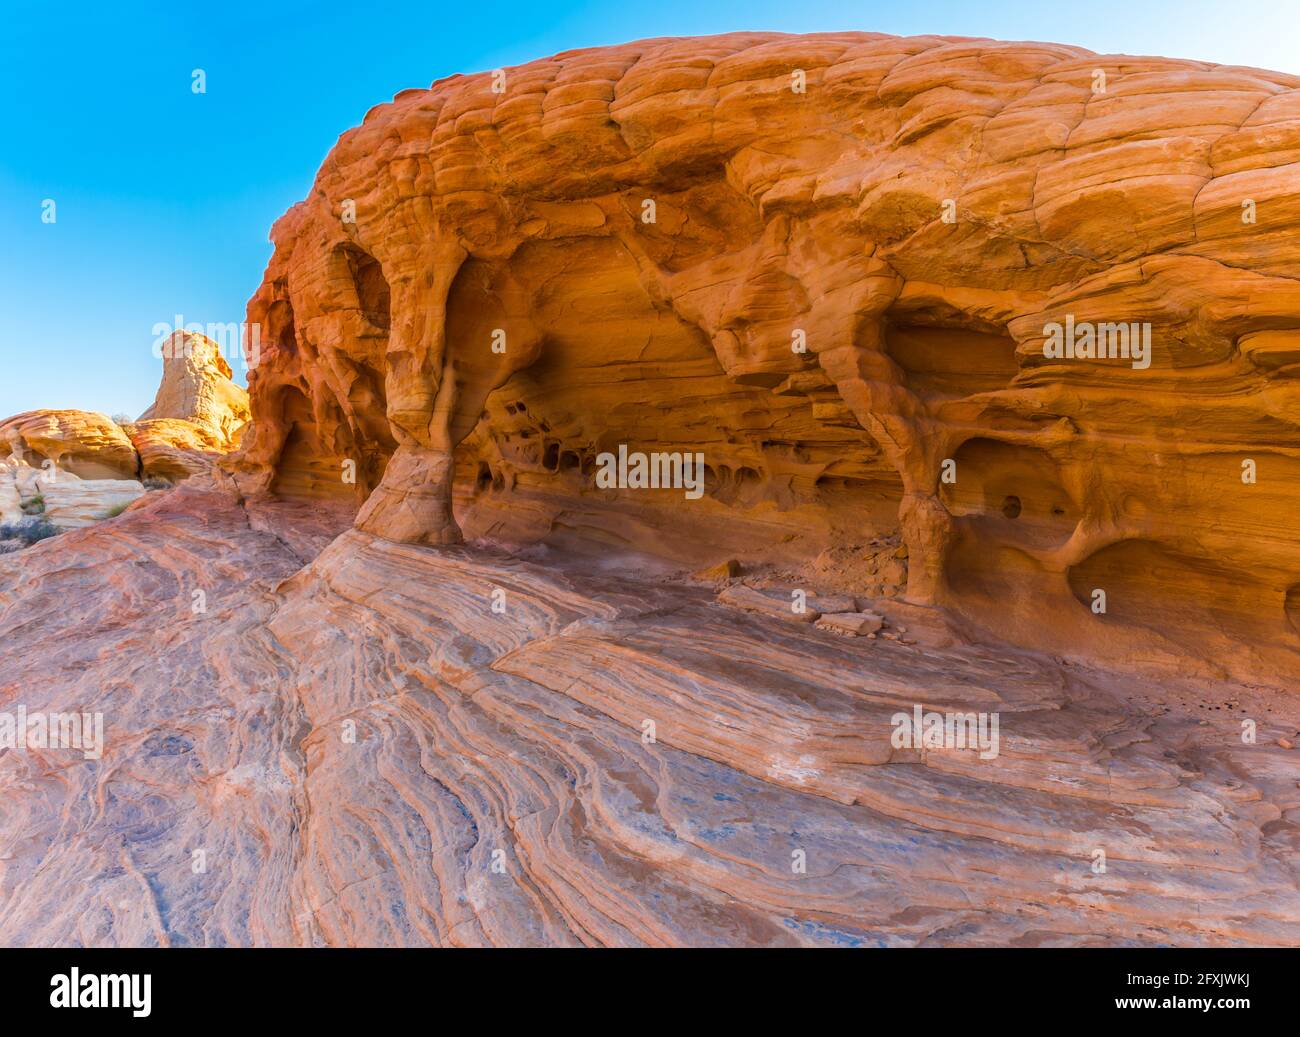 Arches and Towers Formed by Erosion In The Slick Rock Formations of Fire Valley, Valley of Fire State Park, Nevada, USA Stock Photo